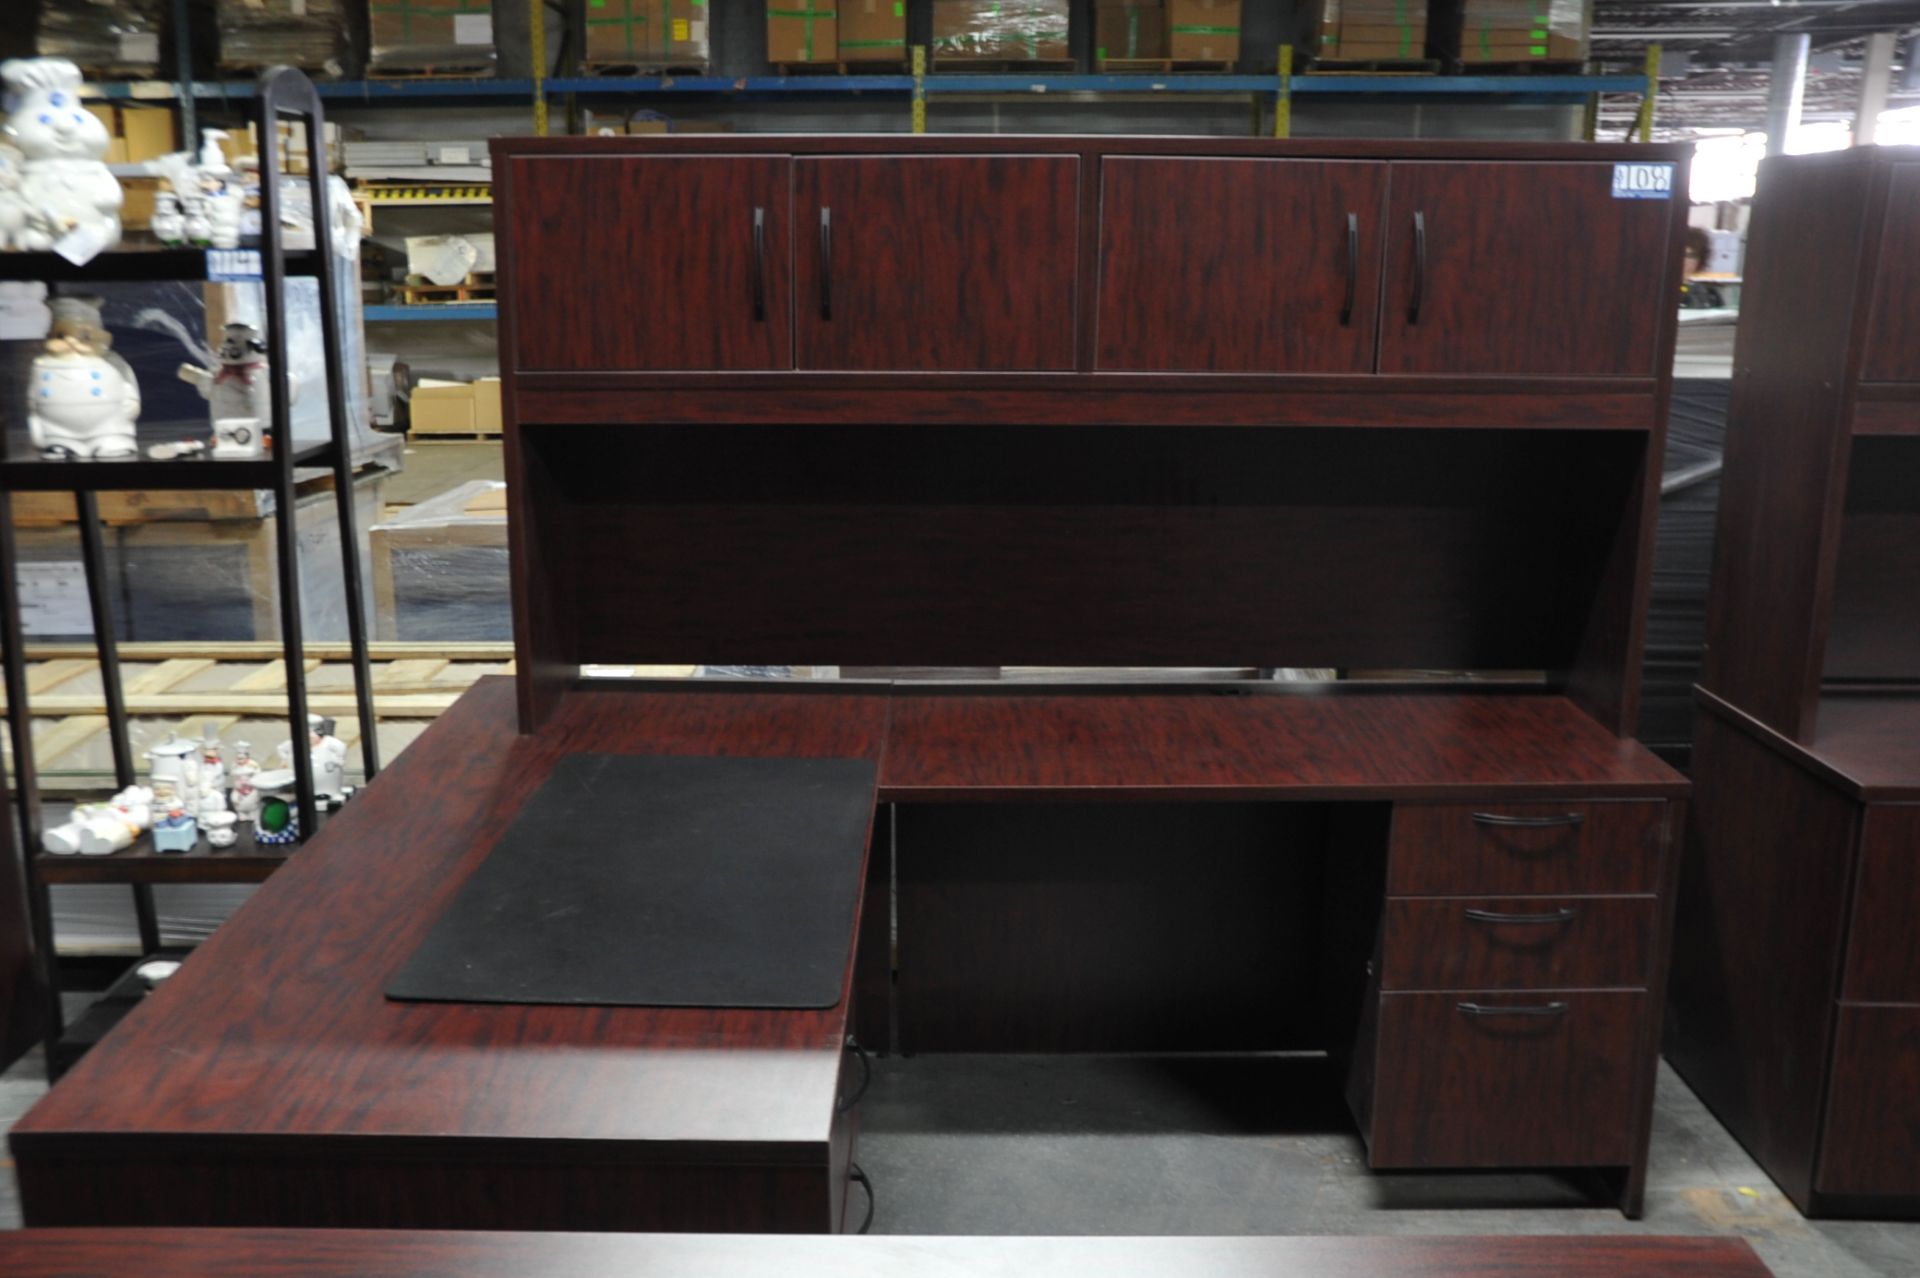 Lot of Office Furniture -  Fixtures & Equipment; Includes L-Shaped Desk c/w Overhead Storage